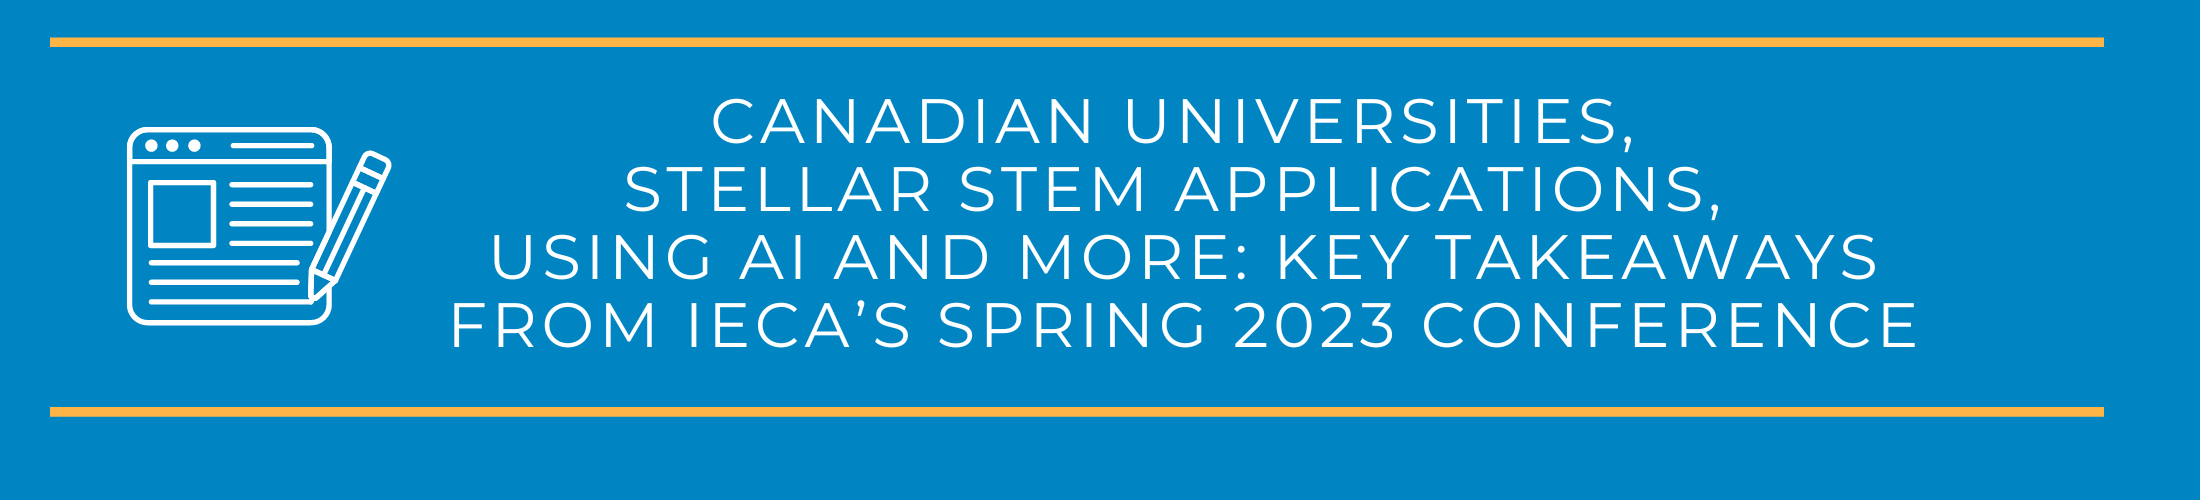 Canadian Universities, Stellar STEM Applications, Using AI and More: Key Takeaways from IECA’s Spring 2023 Conference